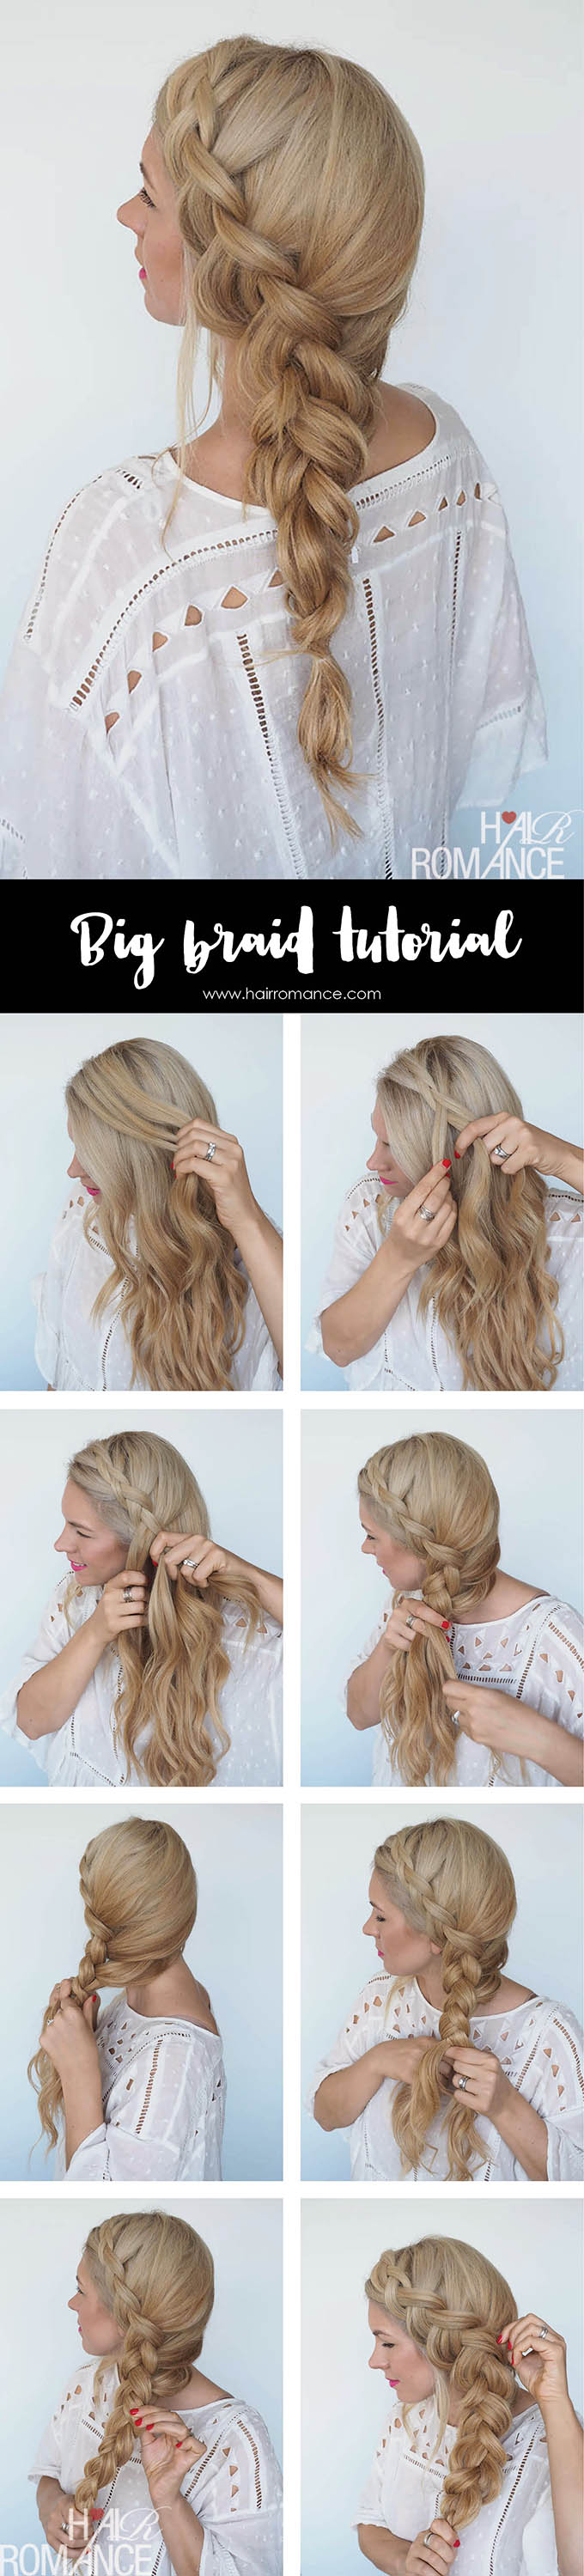 10 Of The Easiest Braided Hairstyles Anyone Can Master